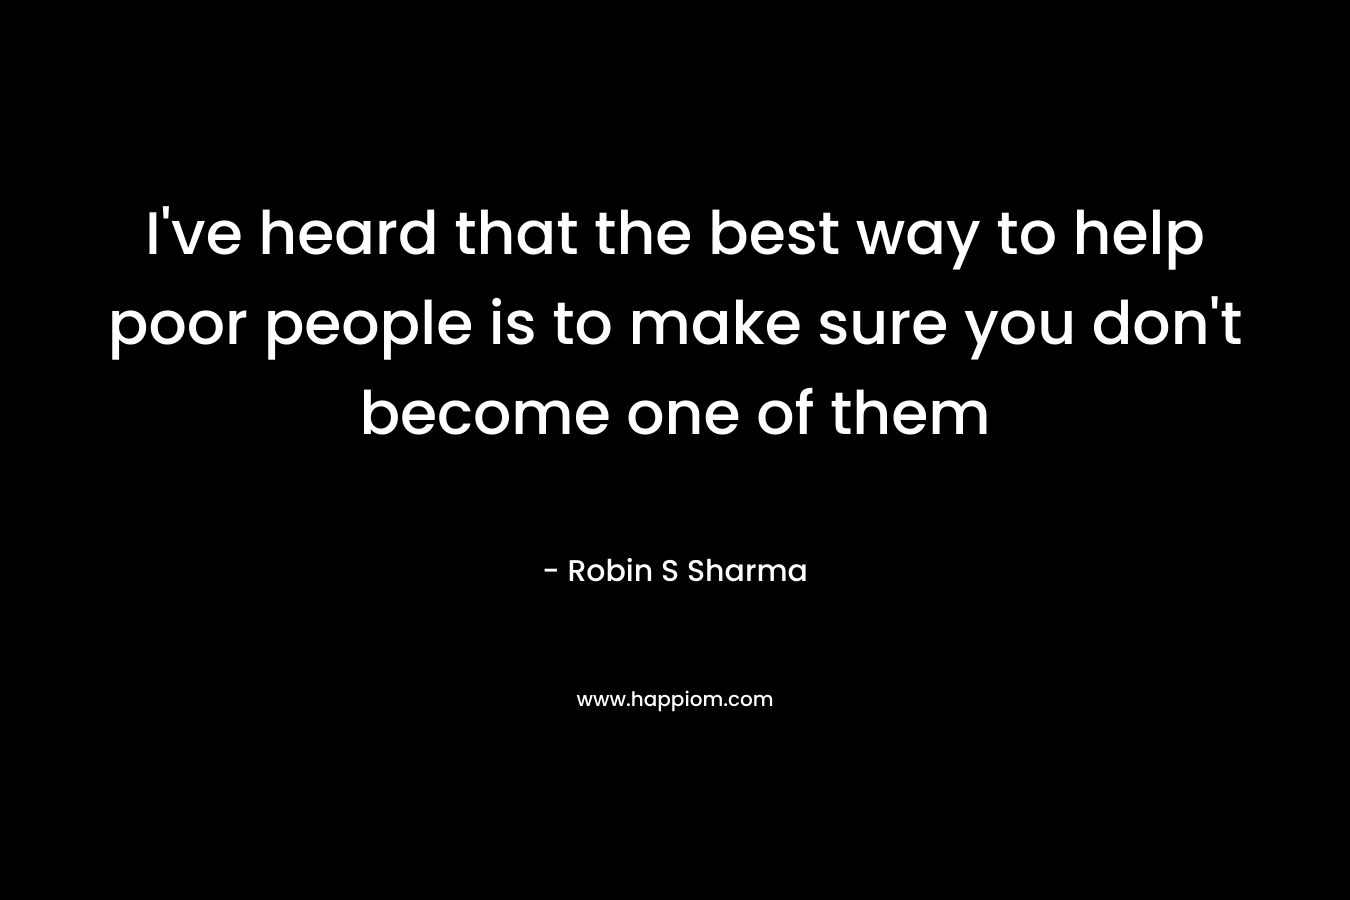 I’ve heard that the best way to help poor people is to make sure you don’t become one of them – Robin S Sharma